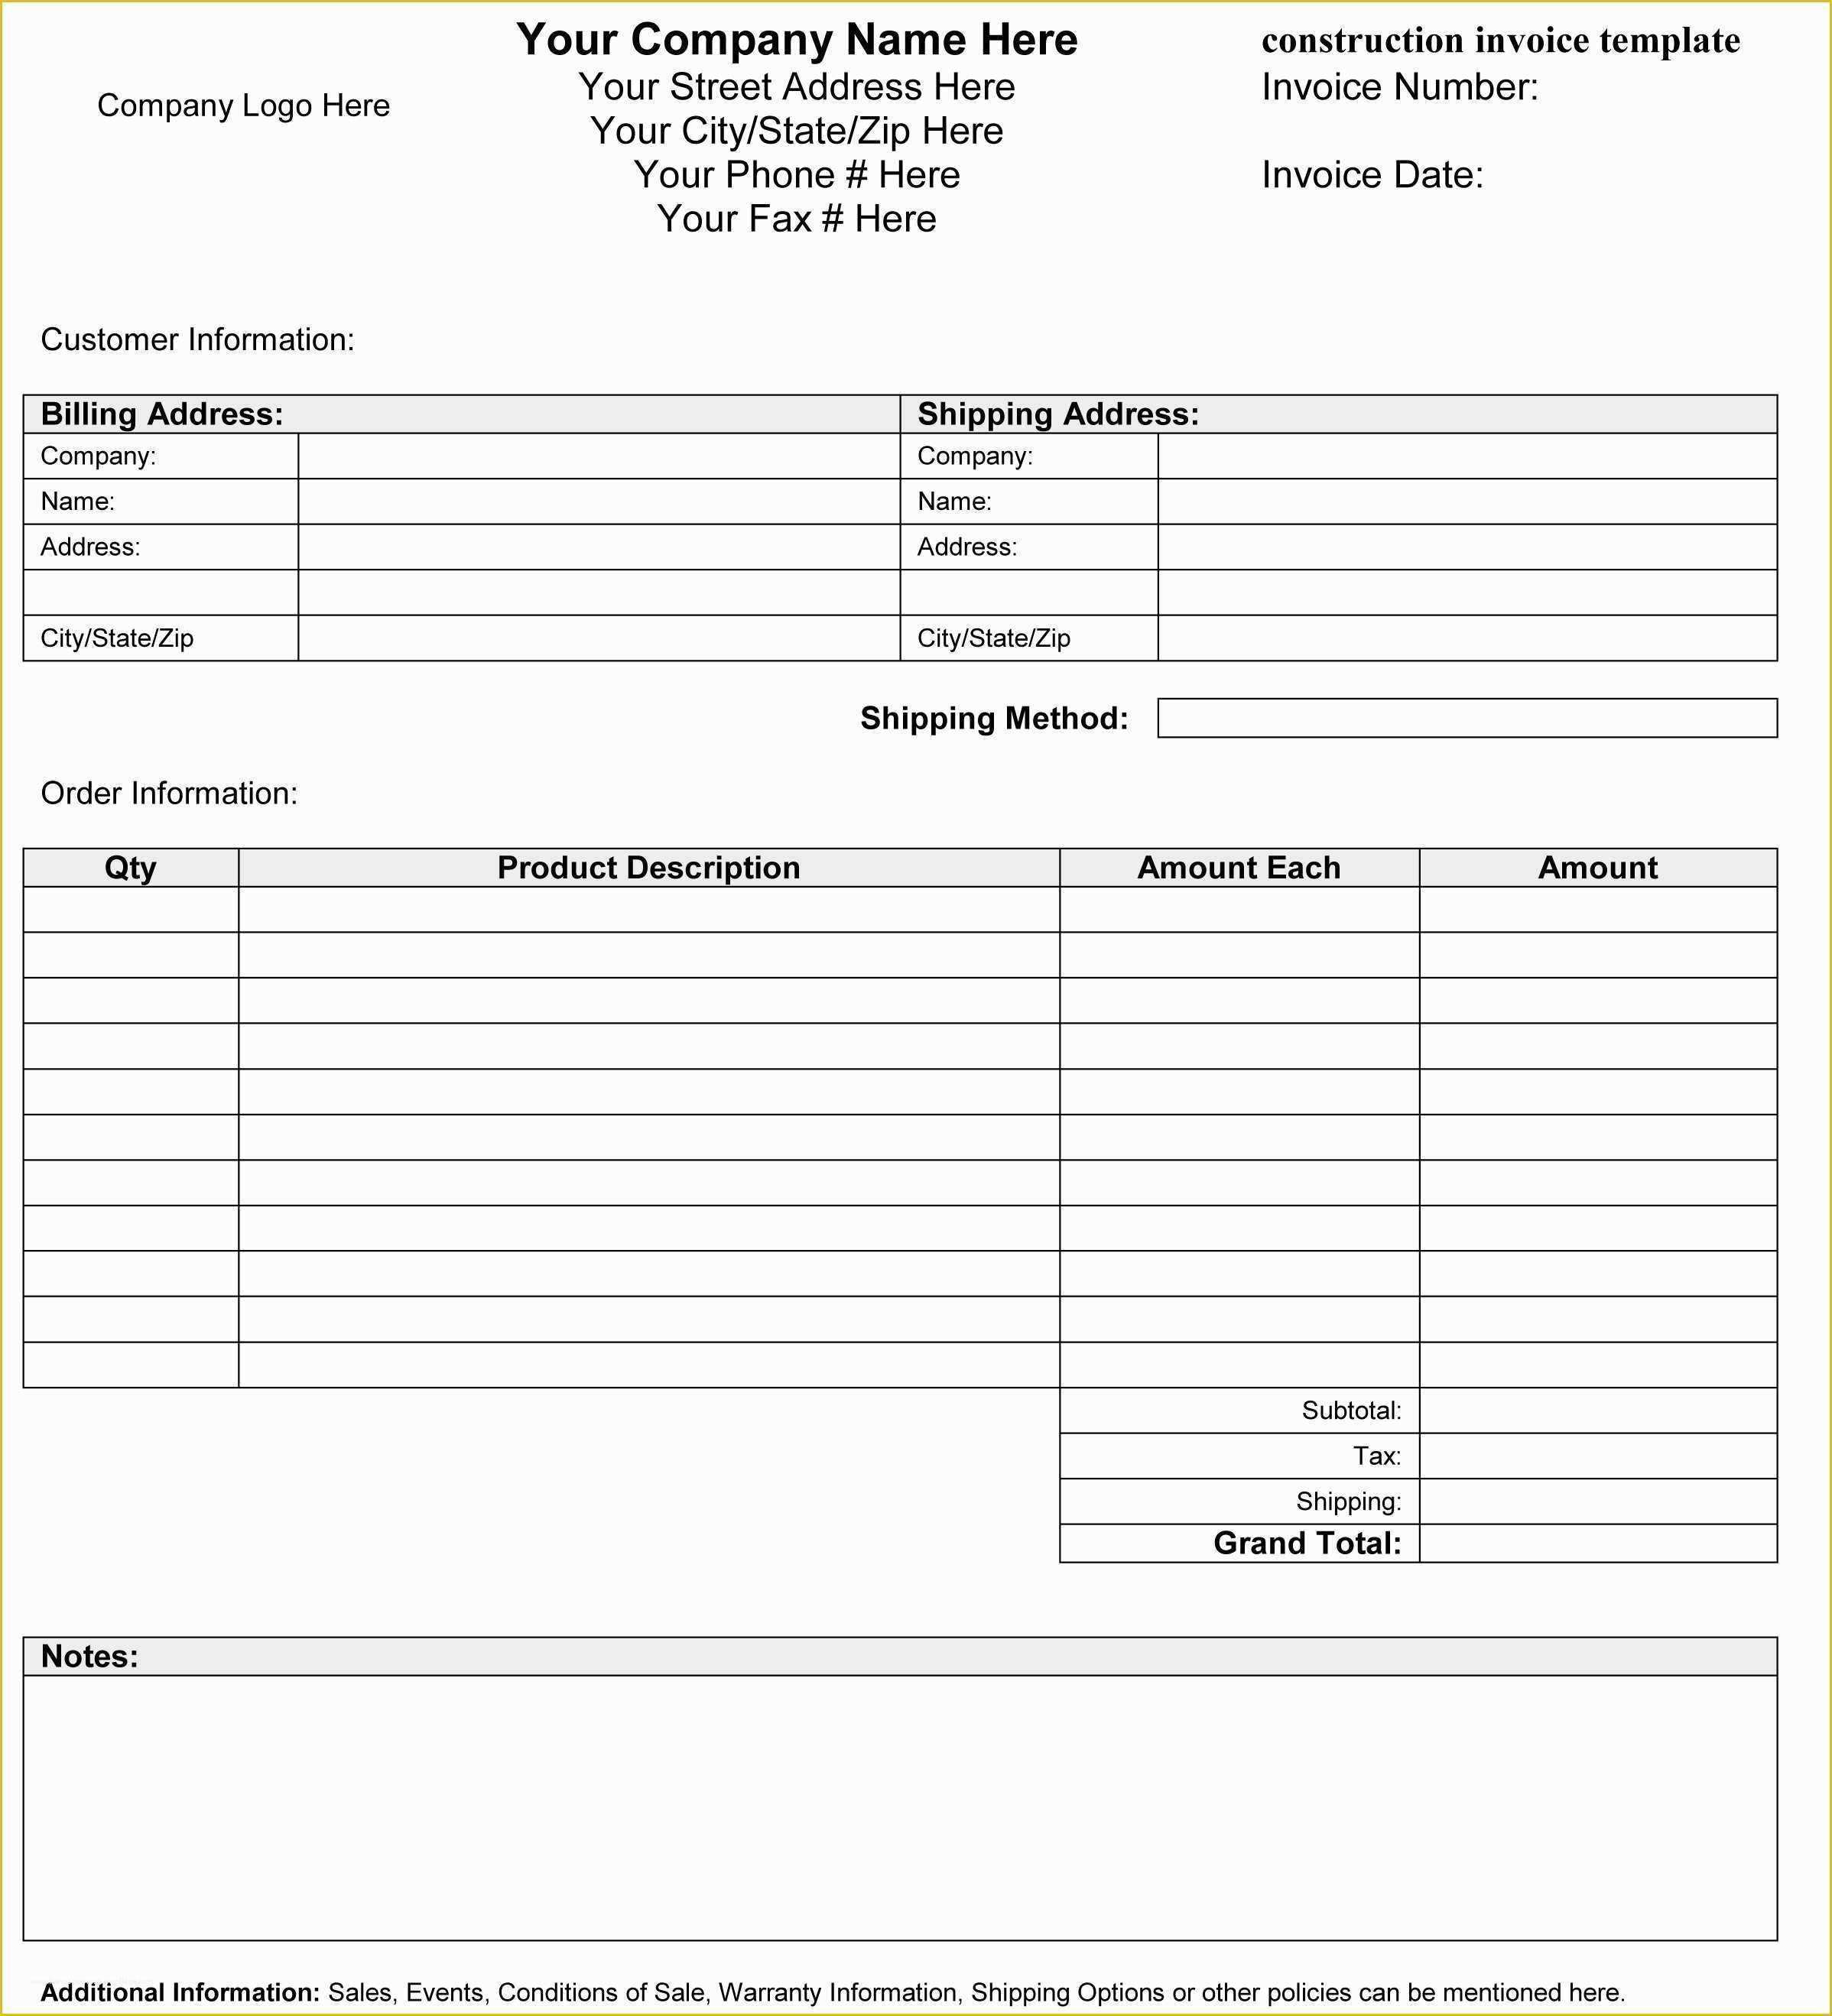 Construction Quotes Templates for Free Of Construction Invoice Template